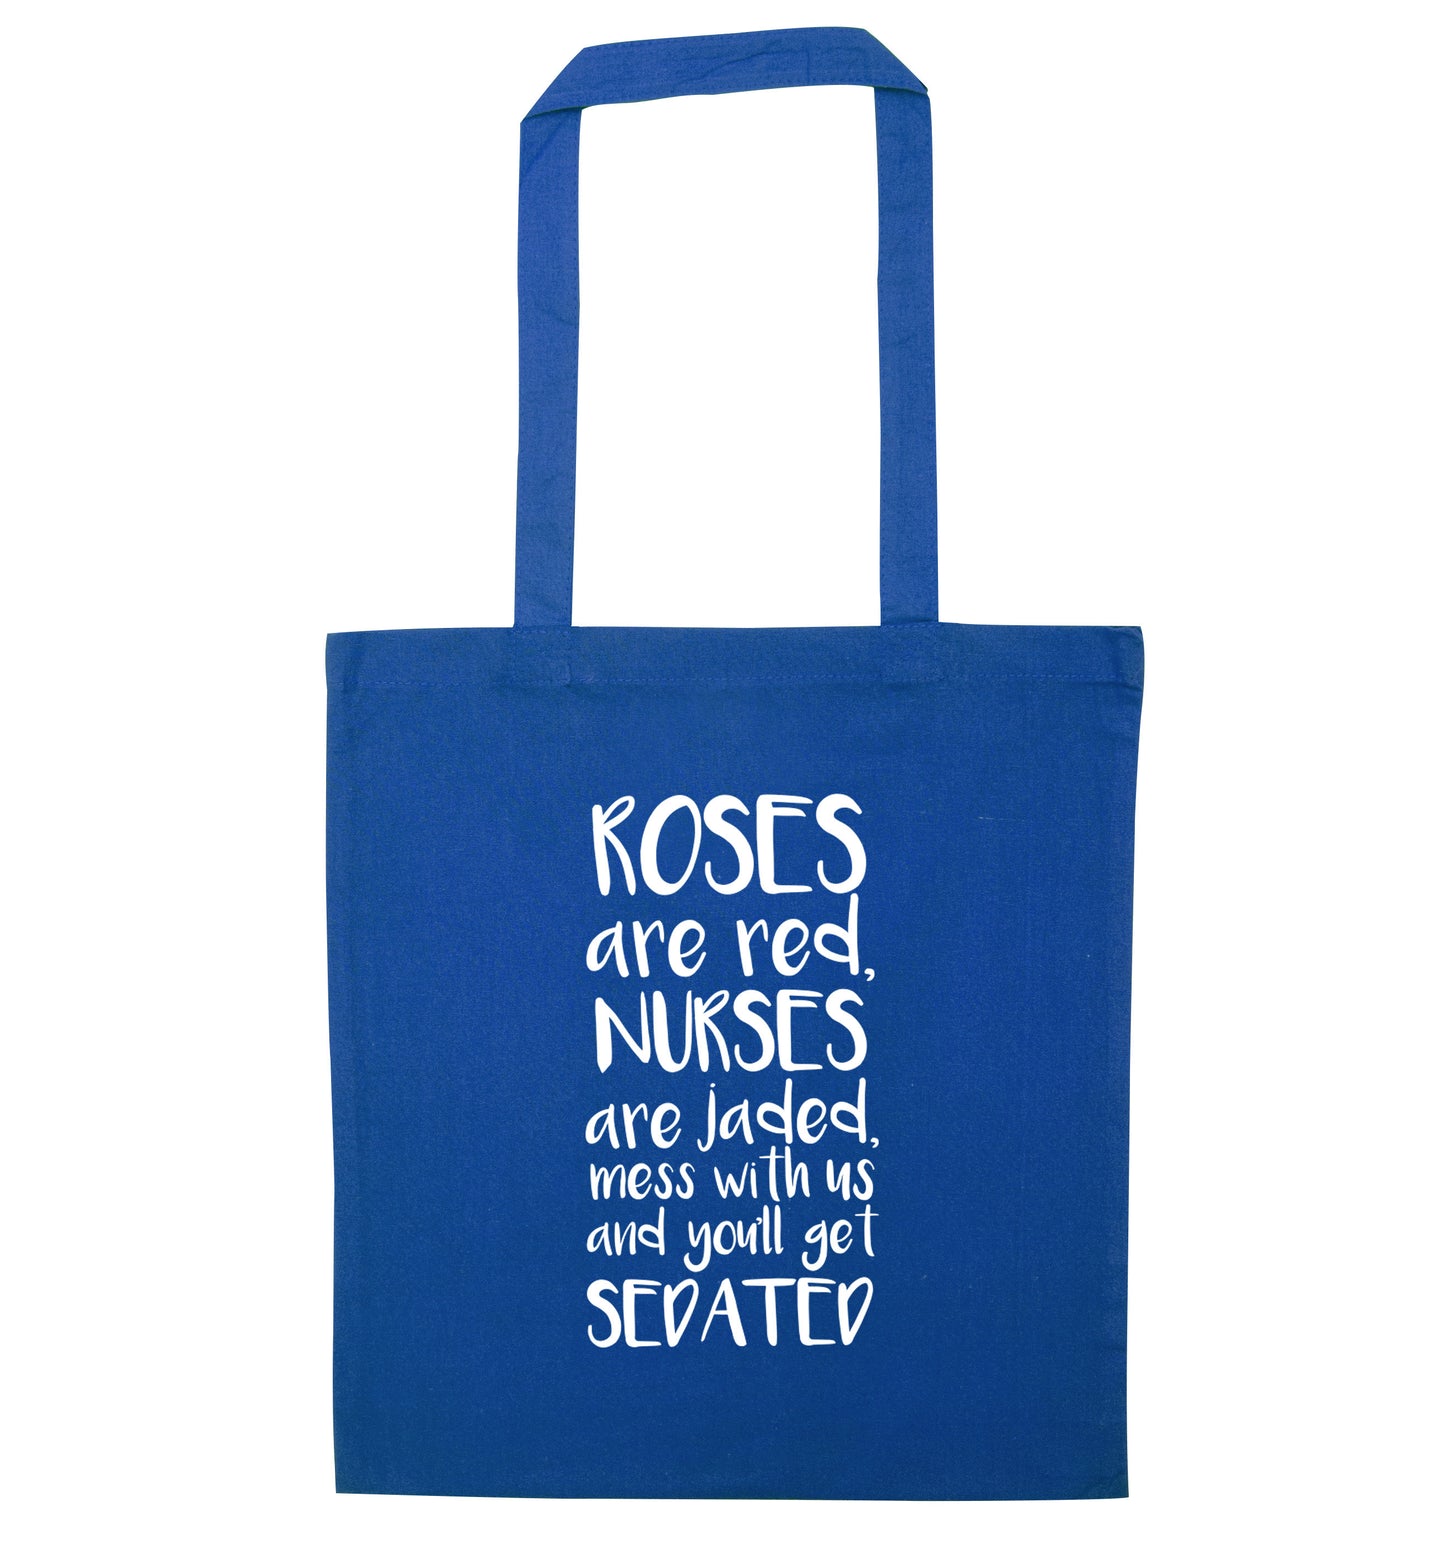 Roses are red, nurses are jaded, mess with us and you'll get sedated blue tote bag